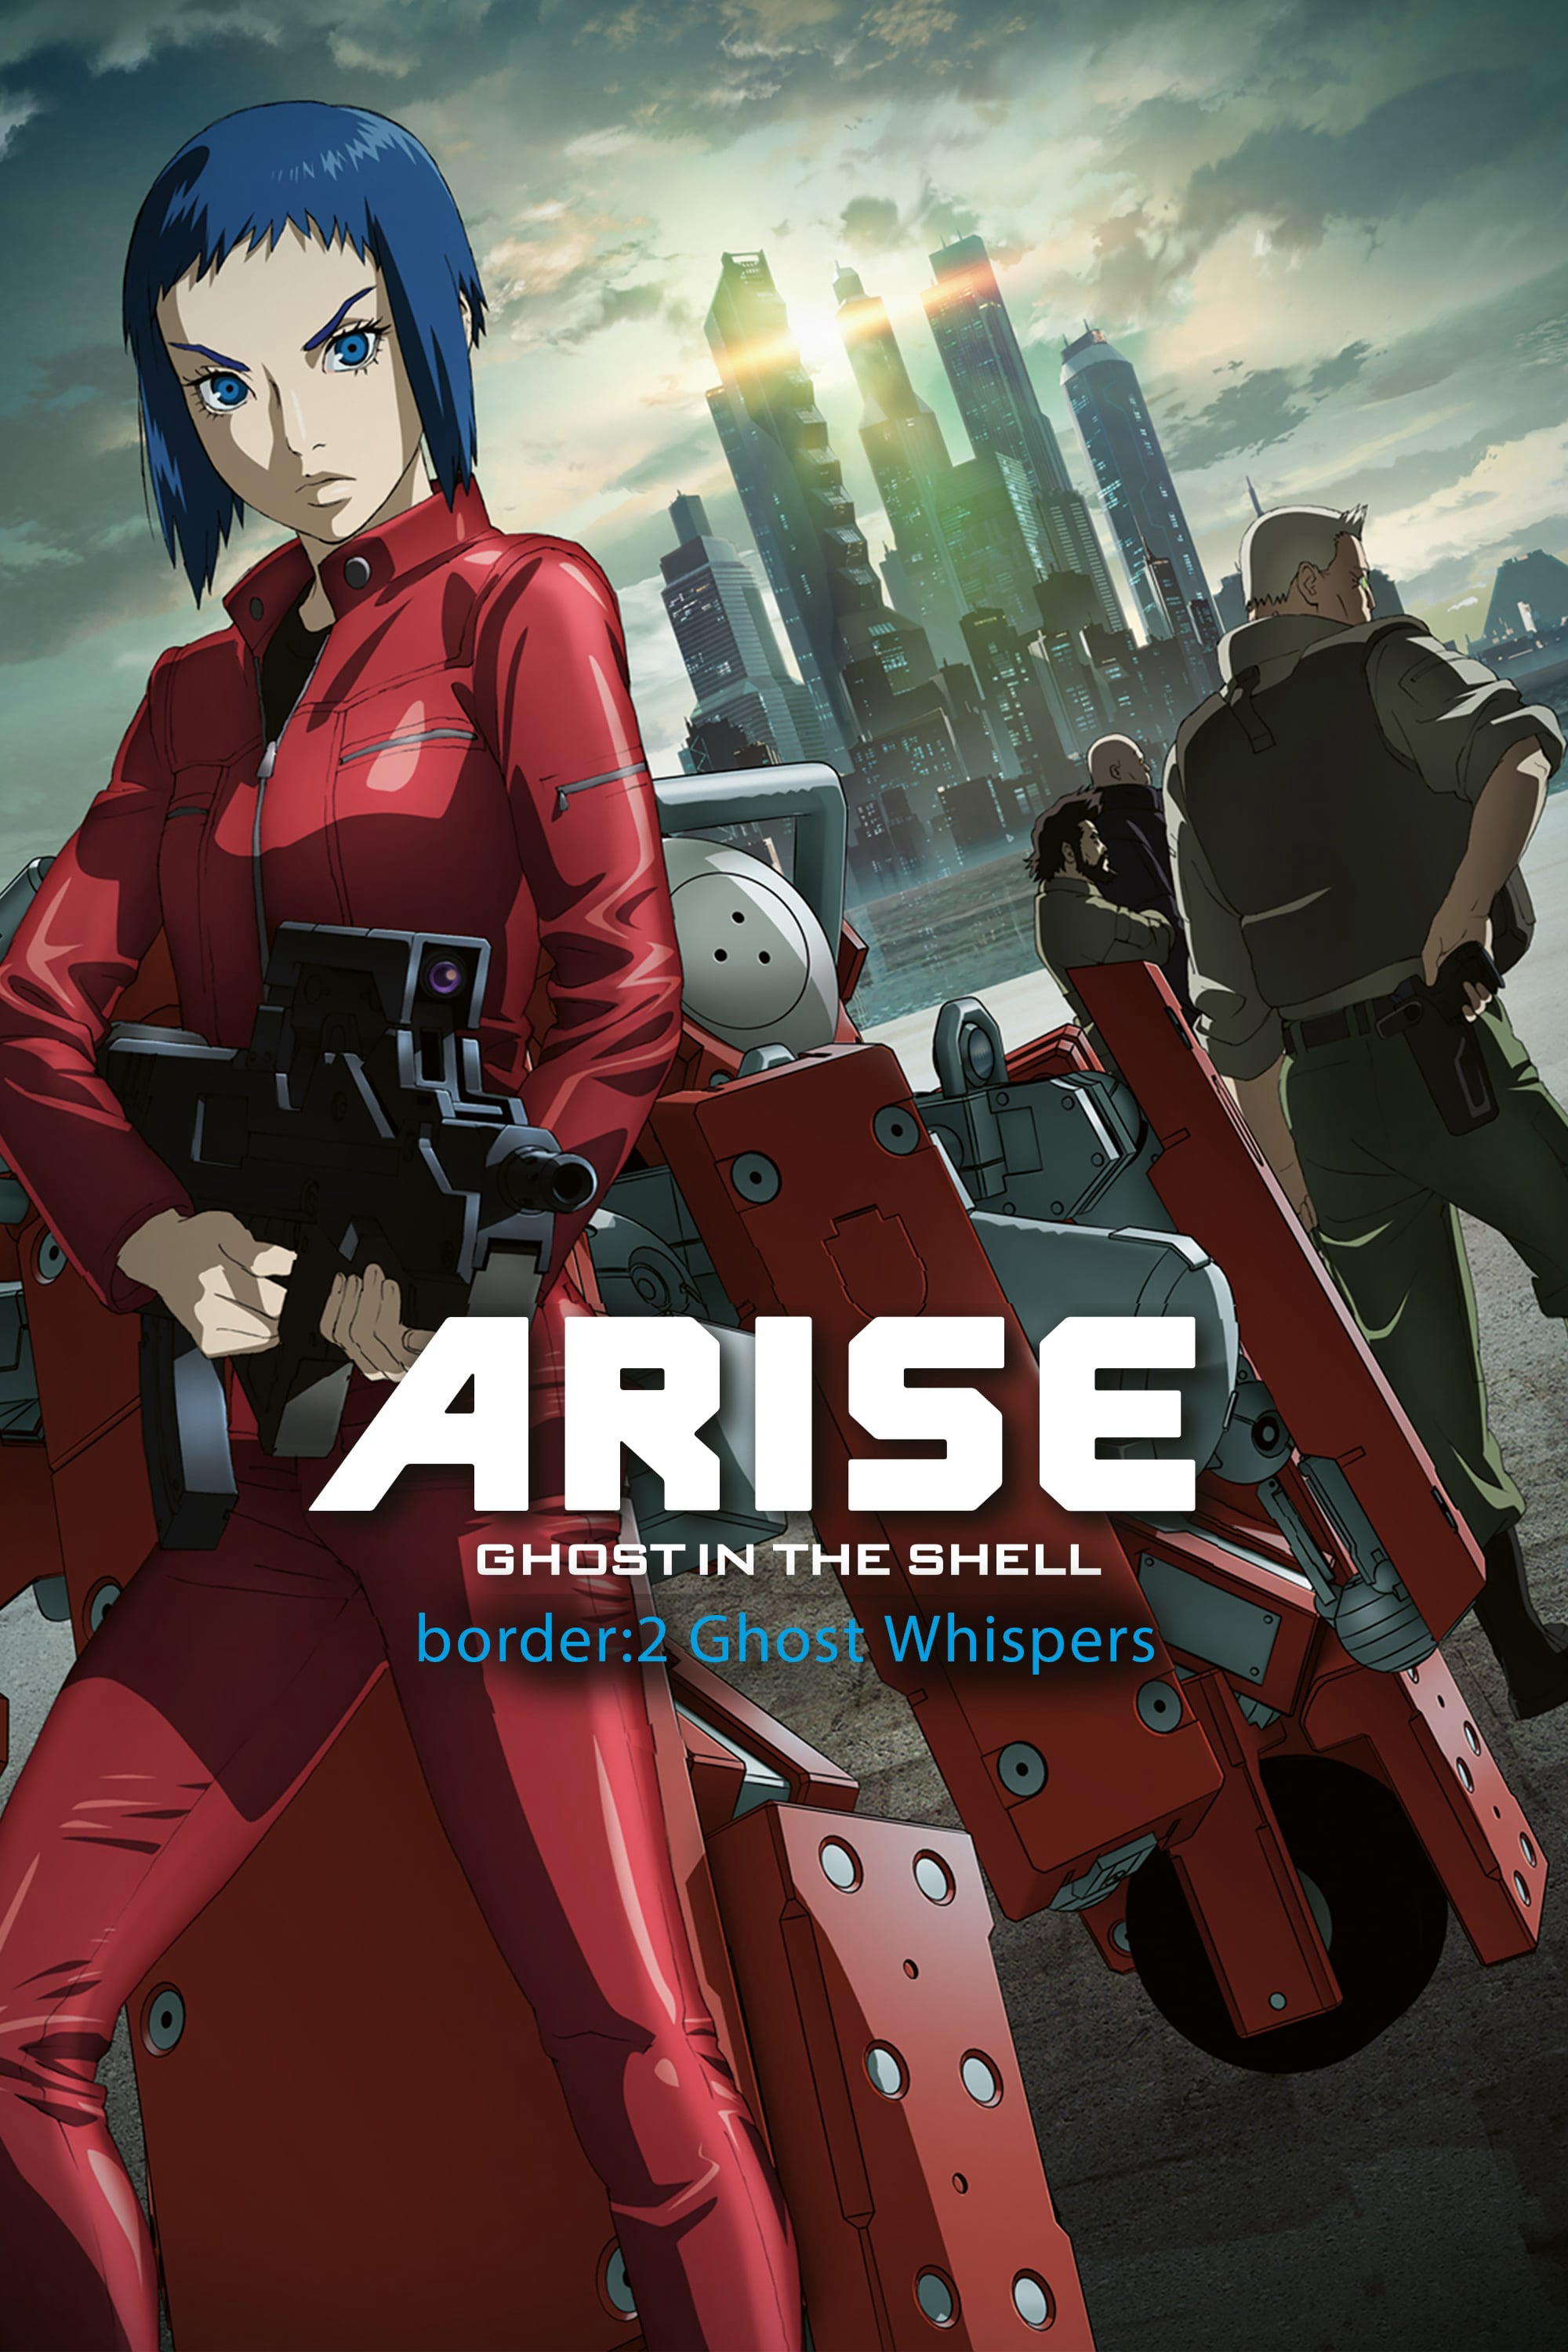 Poster Phim Ghost in the Shell Arise - Border 2: Ghost Whispers (Vỏ Bọc Ma ARISE border: 2 Ma Thì Thầm)